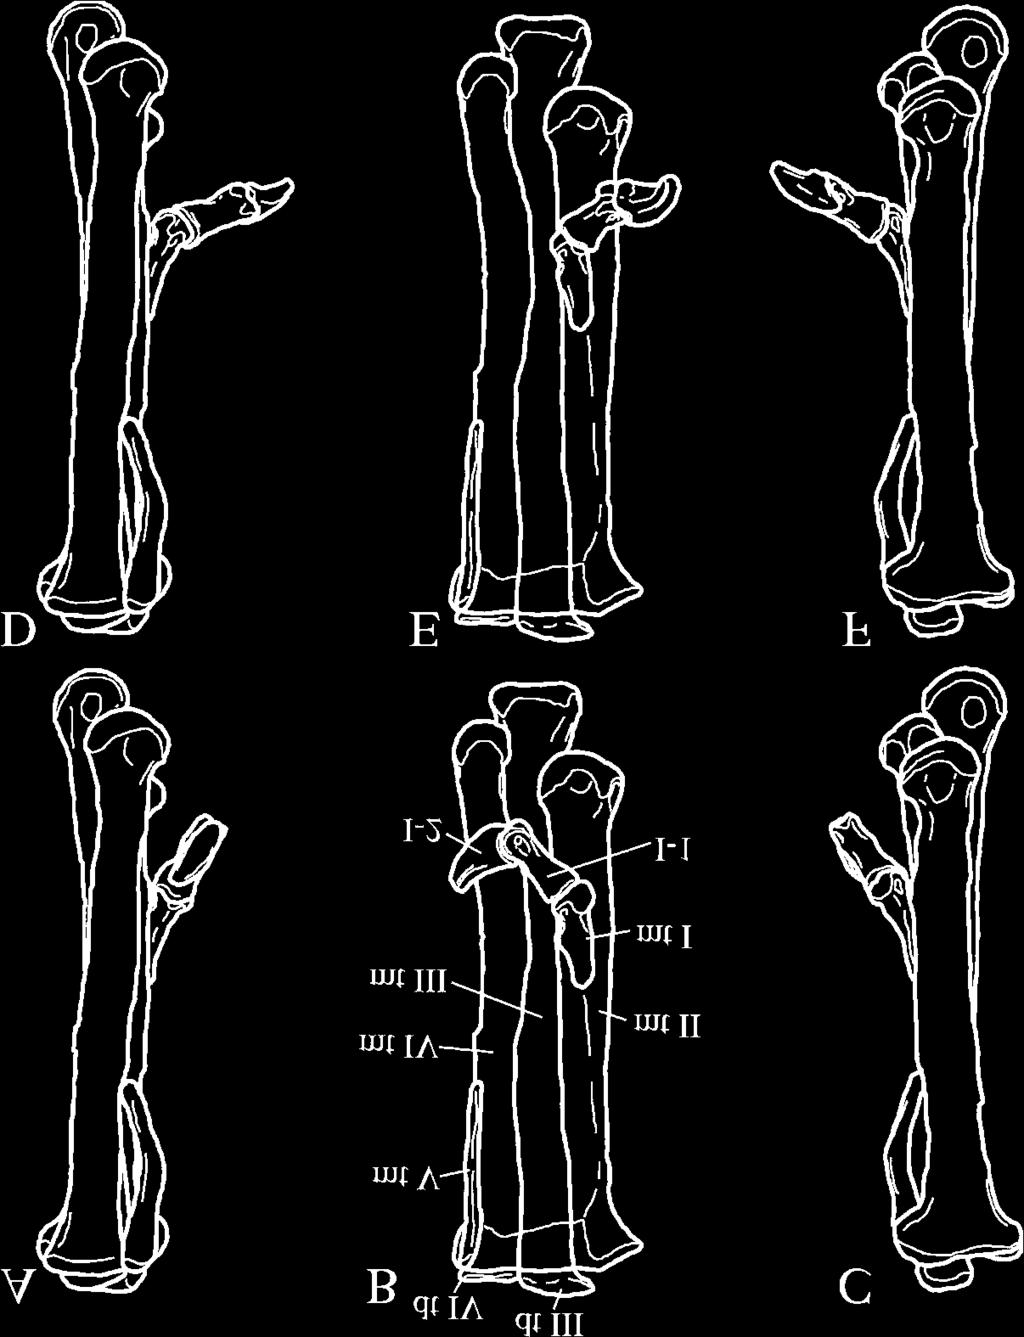 (A) to (C) are flexion condition, and (D) to (F) are extension condition. dt, distal tarsal; mt, metatarsal; I-1, pedal phalanx I-1; I-2, pedal phalanx I-2. Distal tarsals (Fig.